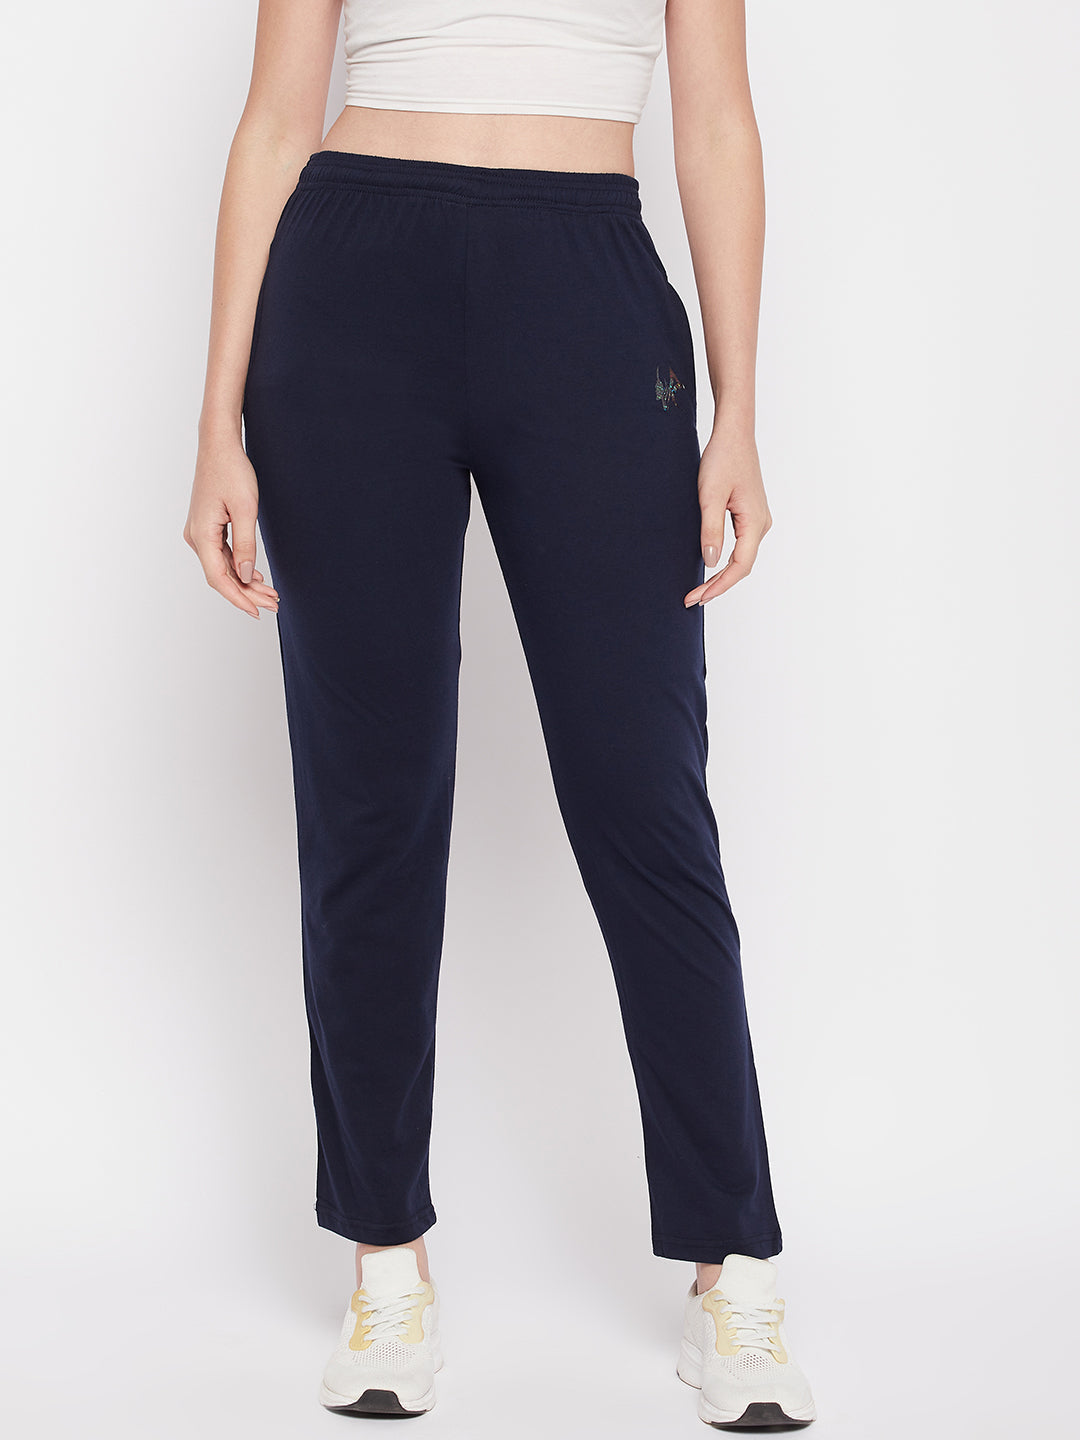 Clora Navy Blue Solid Mid Rise Cotton Track Pants